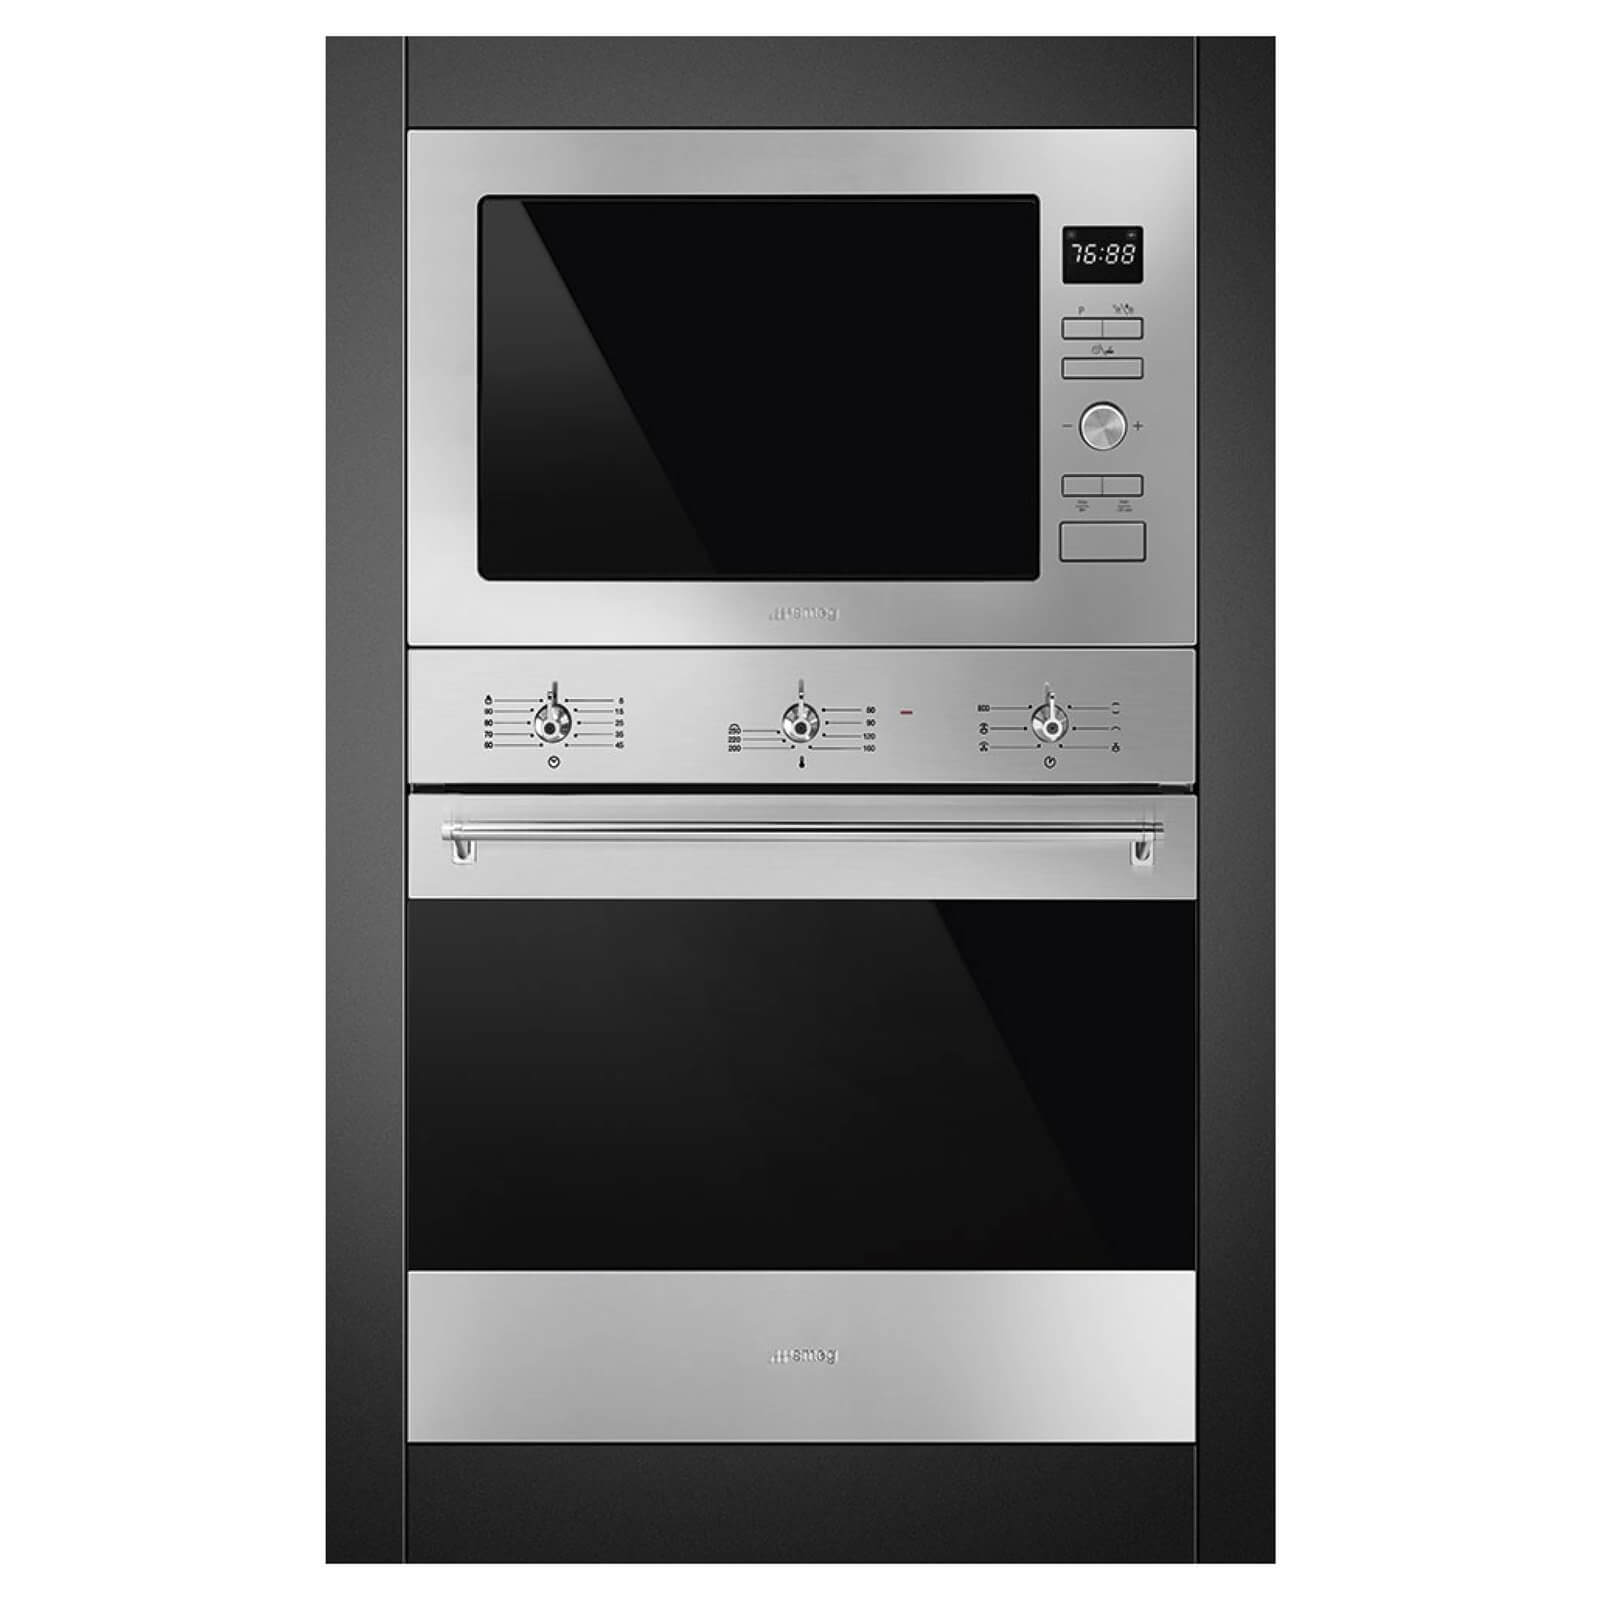 Smeg FMI425X Cucina Stainless Steel Glass Built-in Microwave Oven with Grill complete with Frame - 25 litres